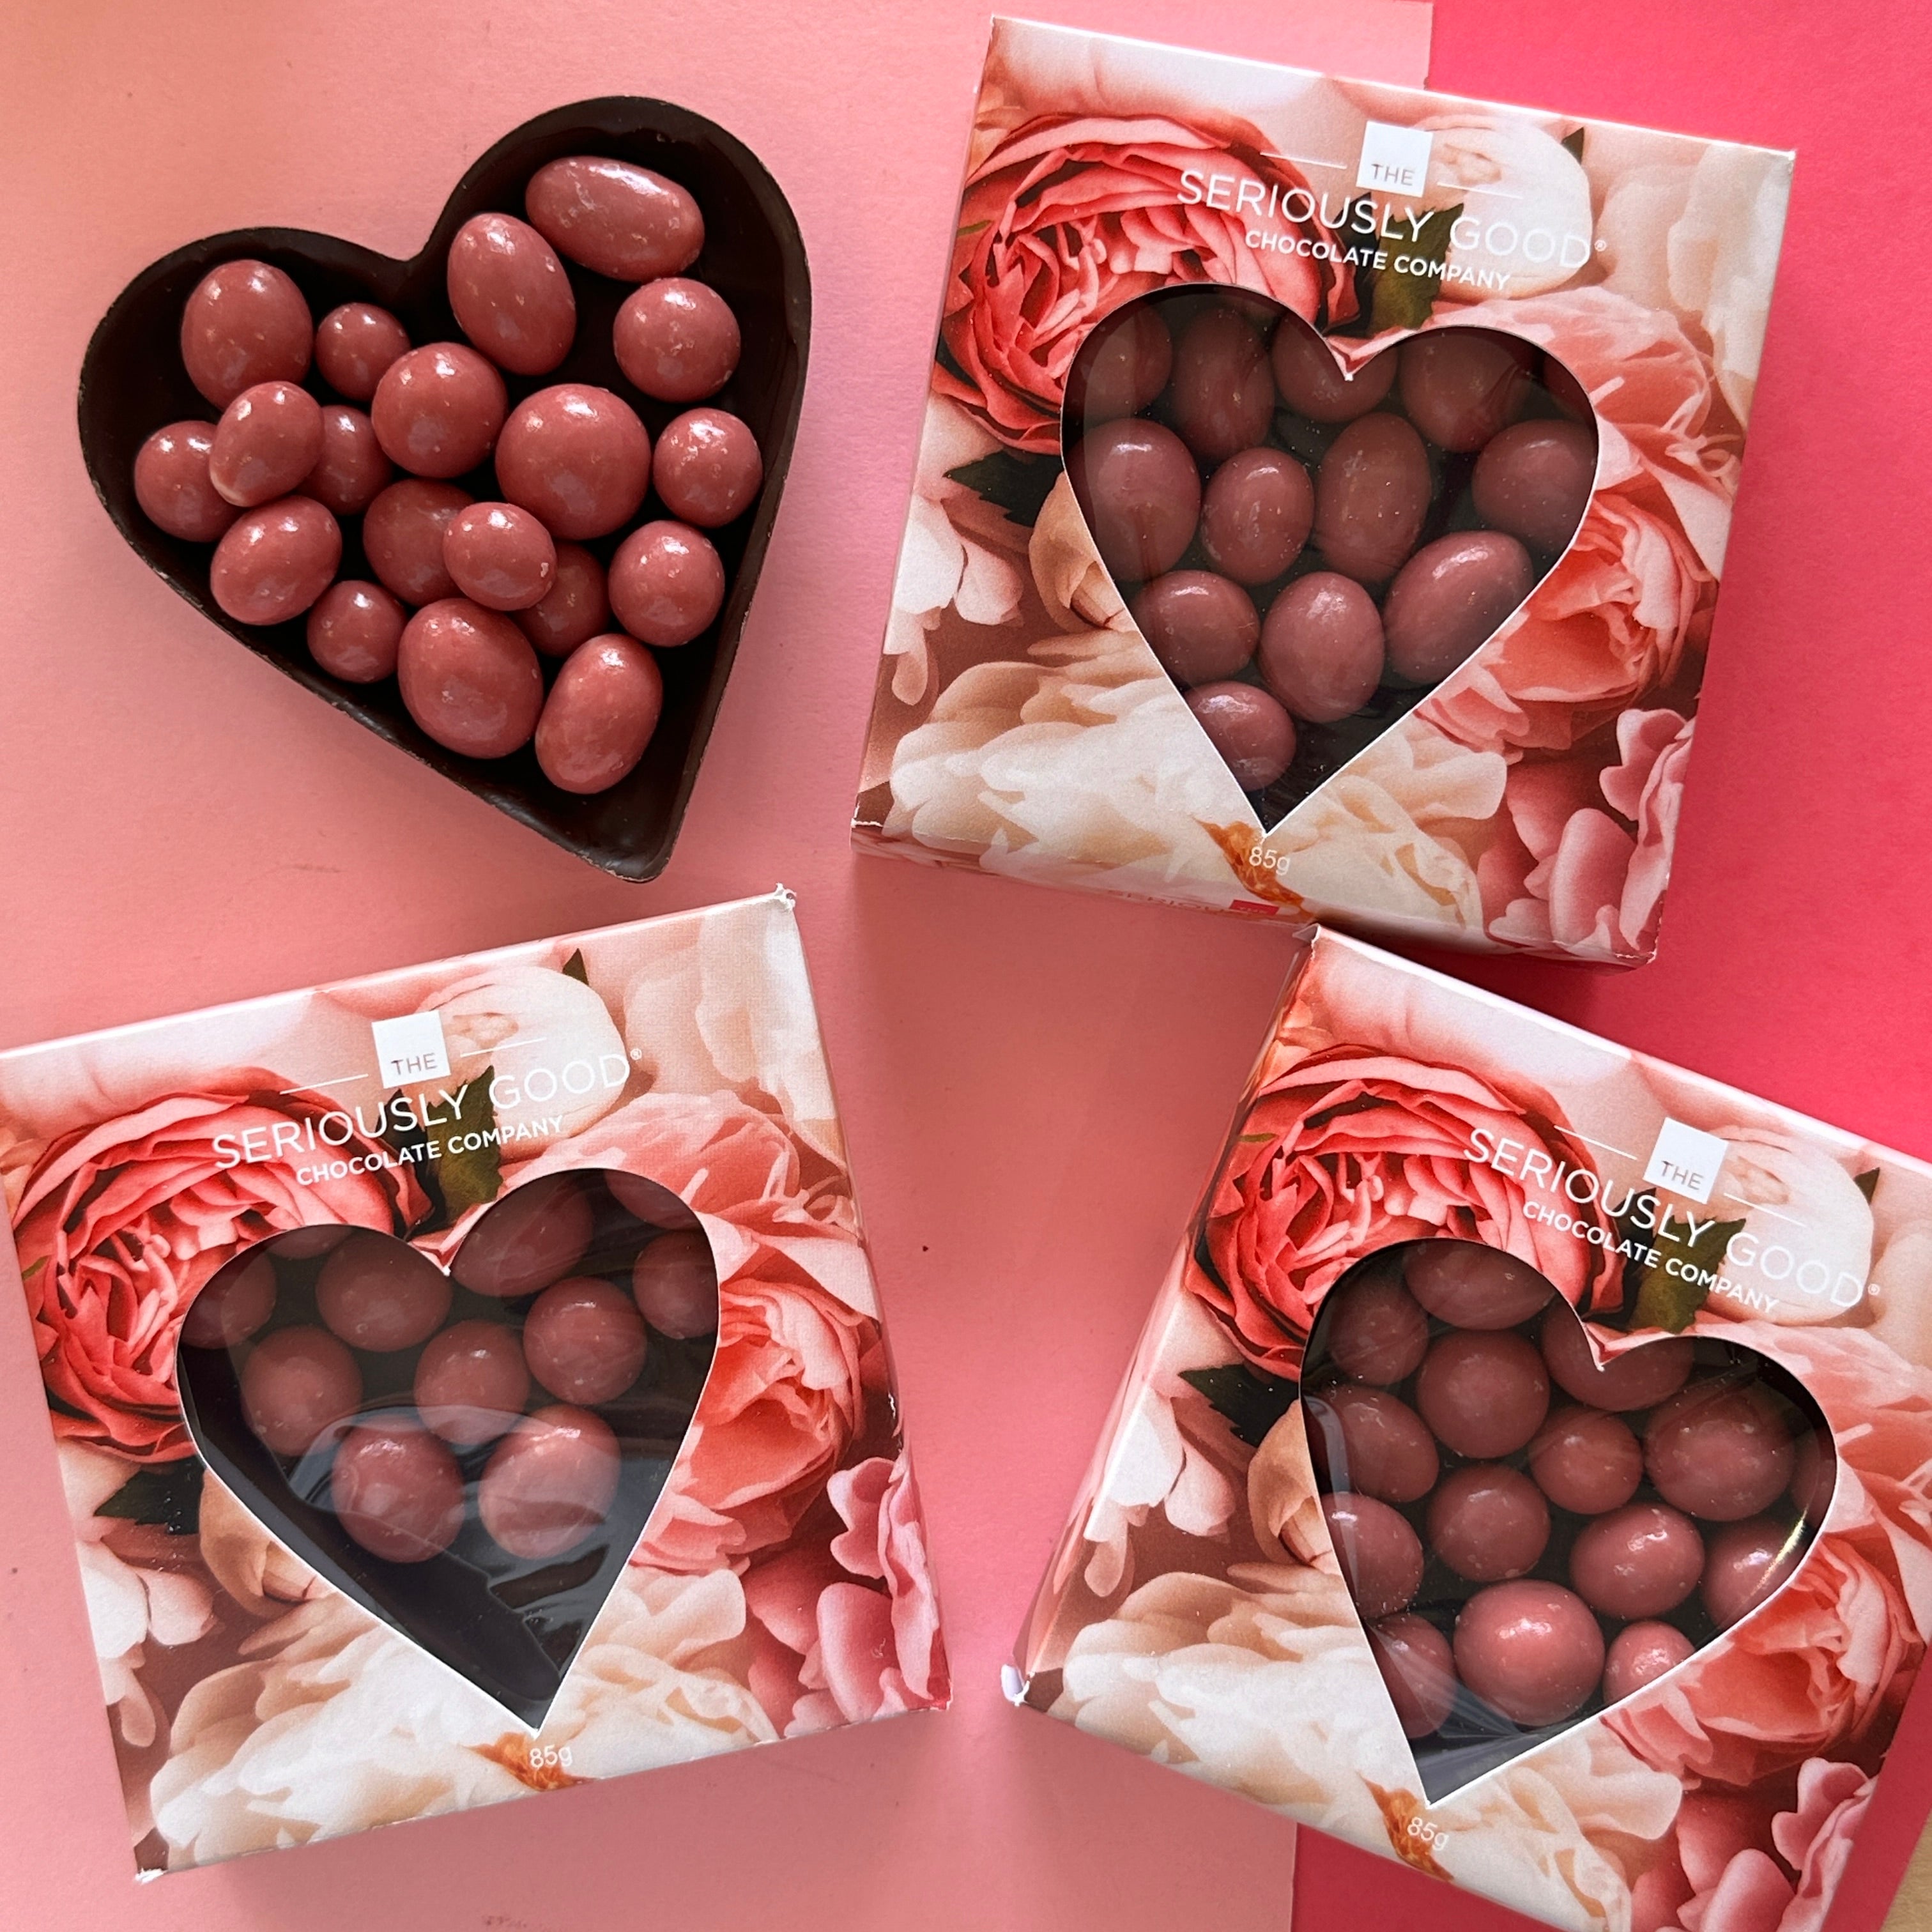 Posies Heart - Chocolate heart cup with freeze dried raspberries coated in ruby chocolate